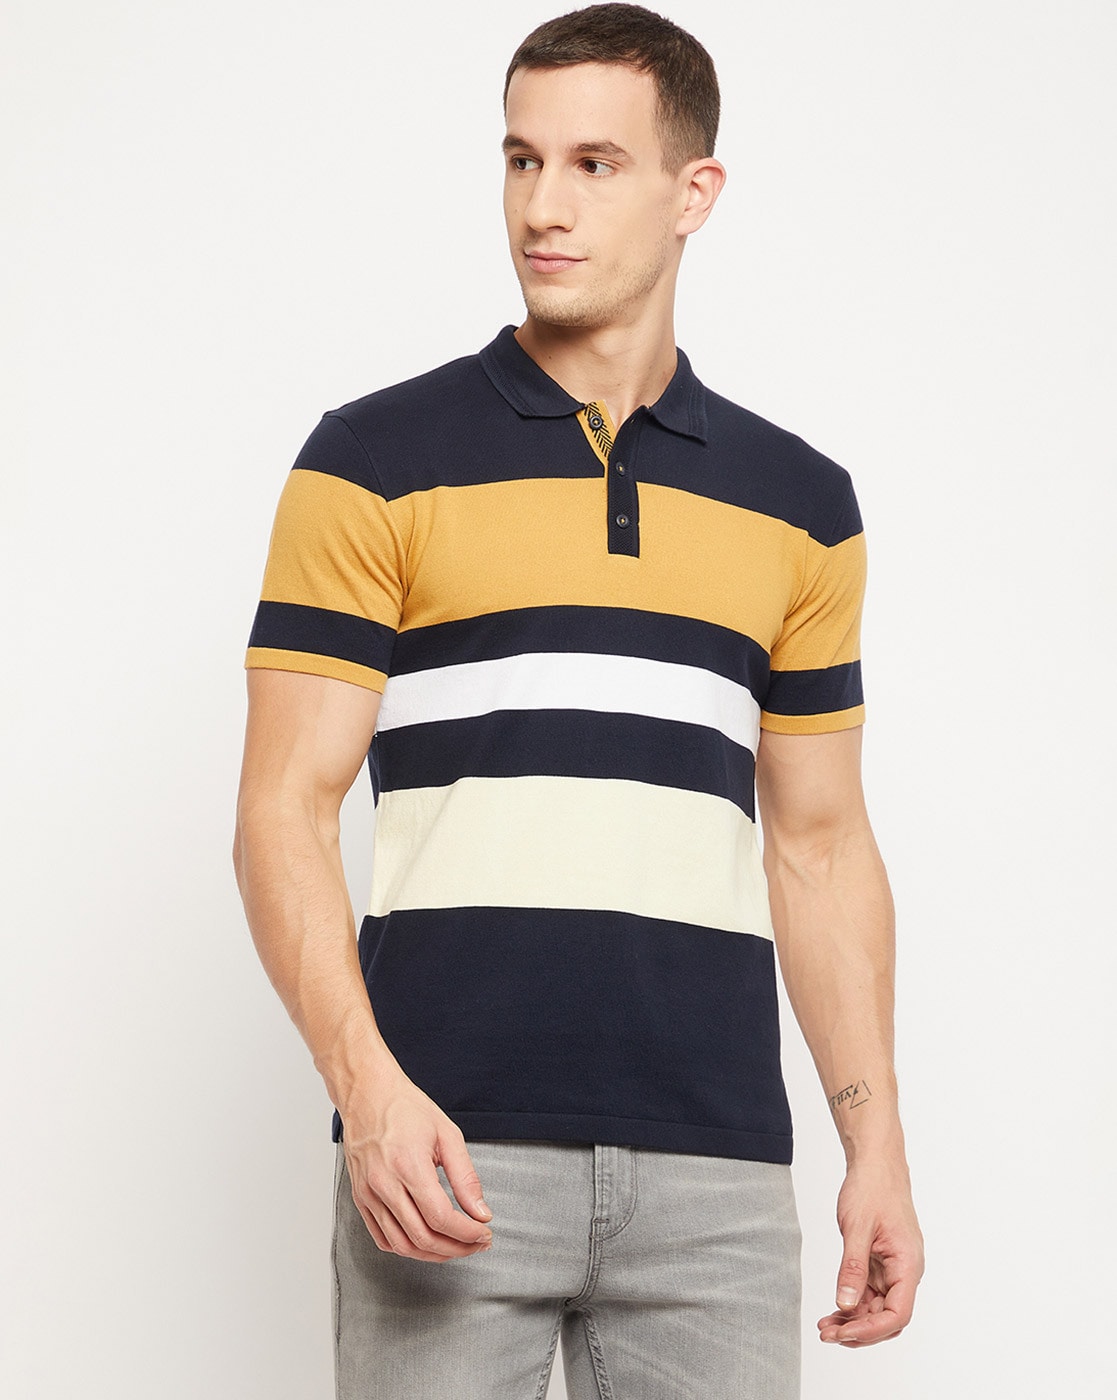 Octave/Exceed Clothing Ludhiana, 41% OFF | www.elevate.in